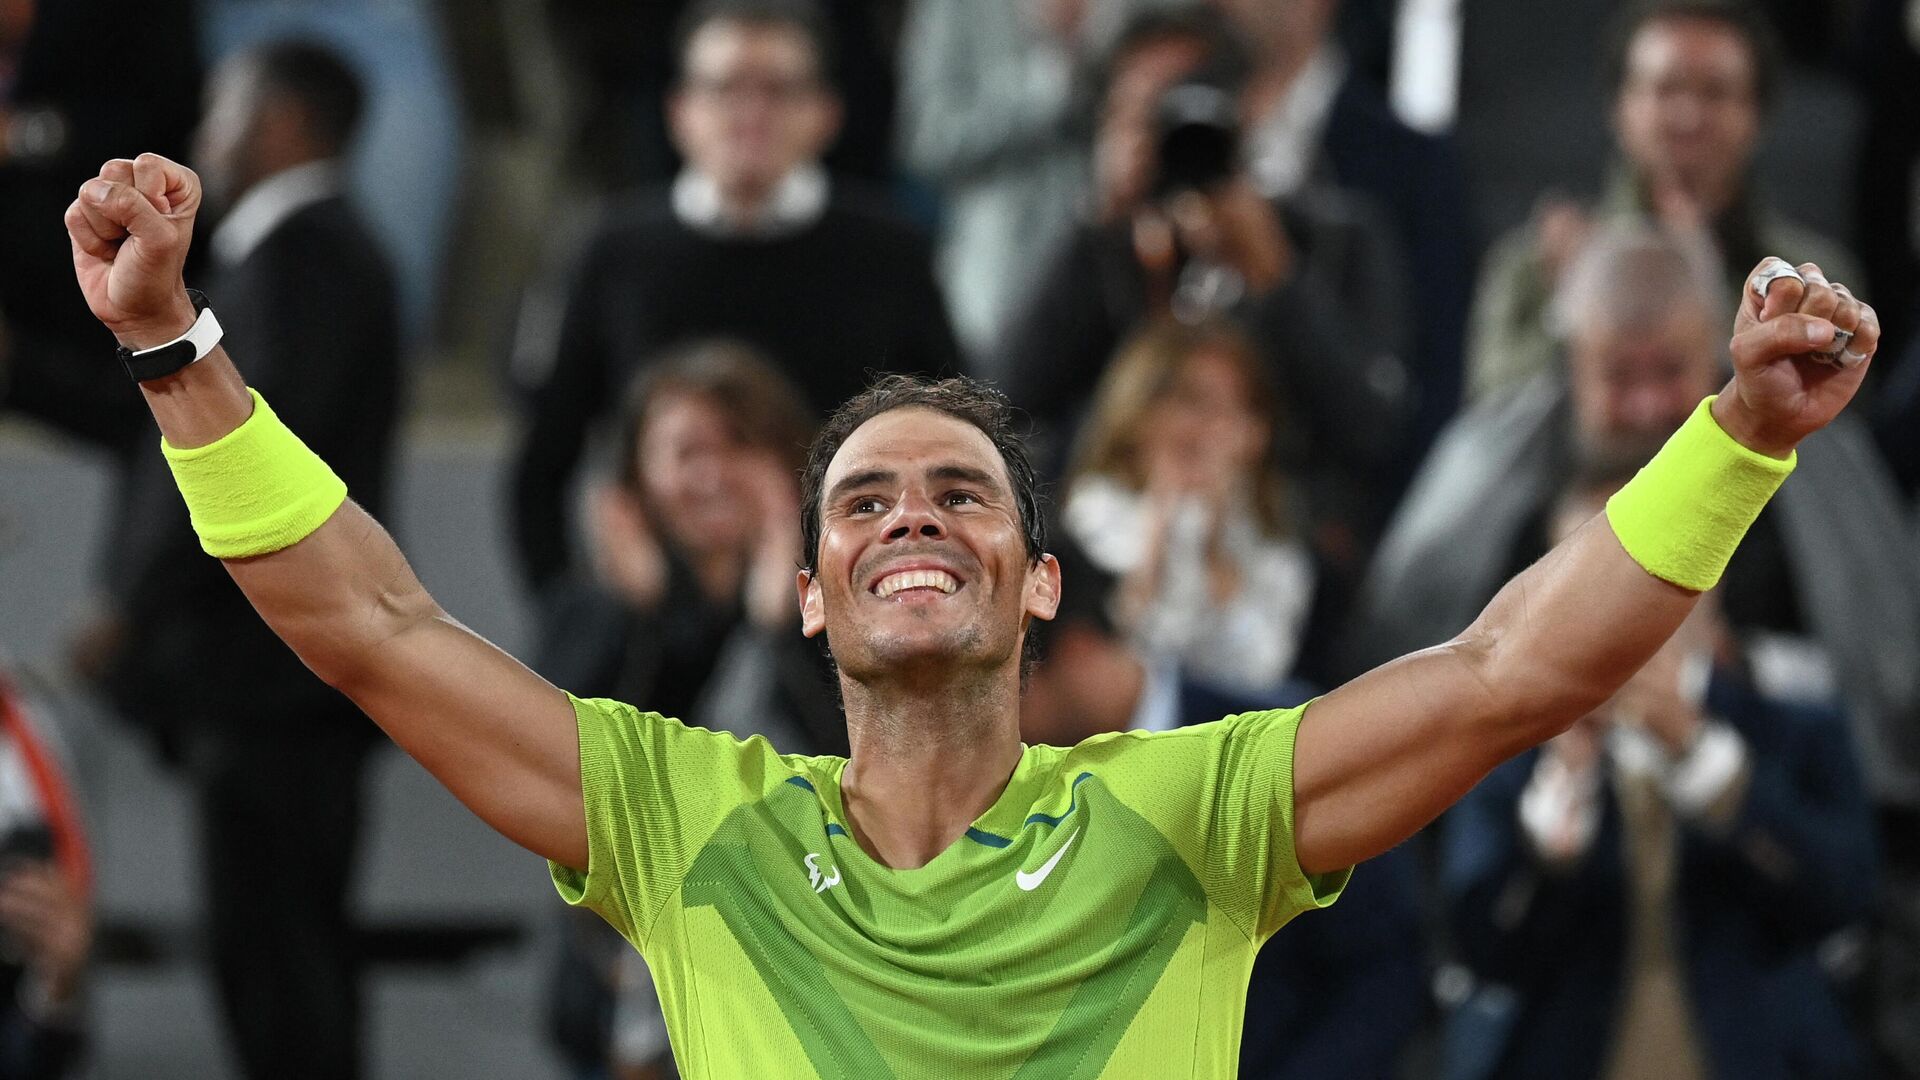 Spain's Rafael Nadal reacts after winning against Serbia's Novak Djokovic at the end of their men's singles match on day ten of the Roland-Garros Open tennis tournament at the Court Philippe-Chatrier in Paris early June 1, 2022 - Sputnik International, 1920, 01.06.2022